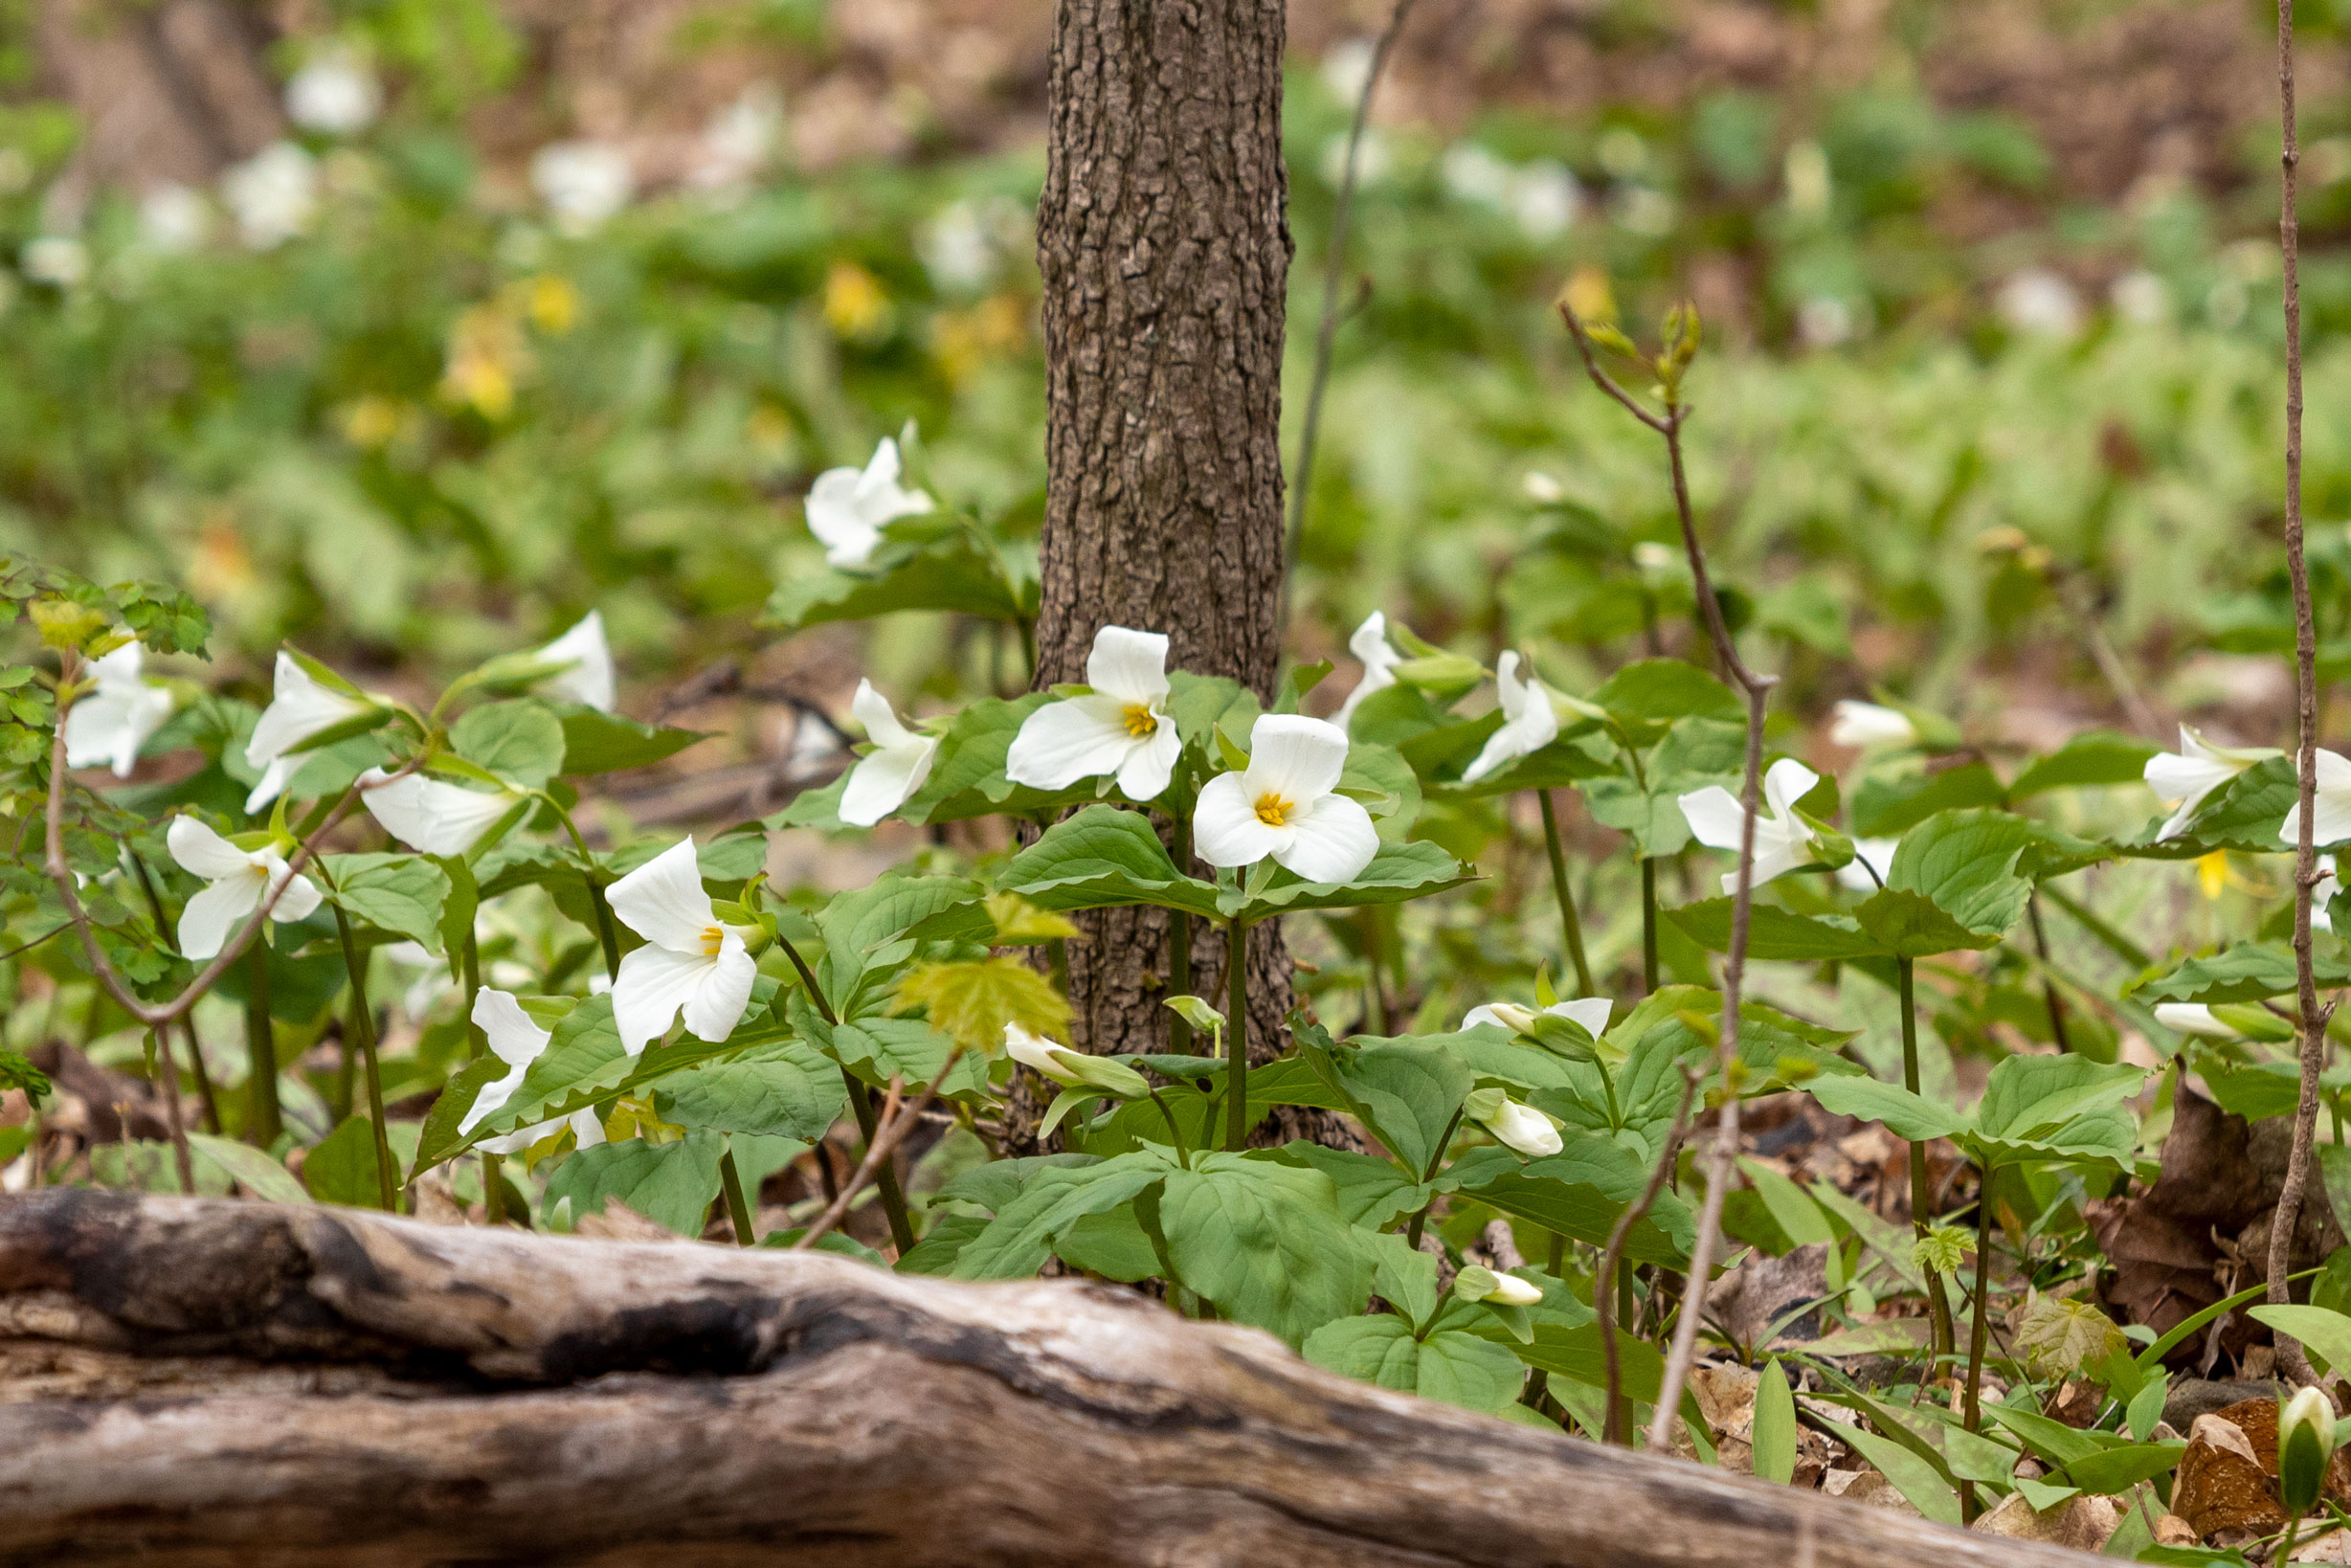 A field of trilliums on the forest floor